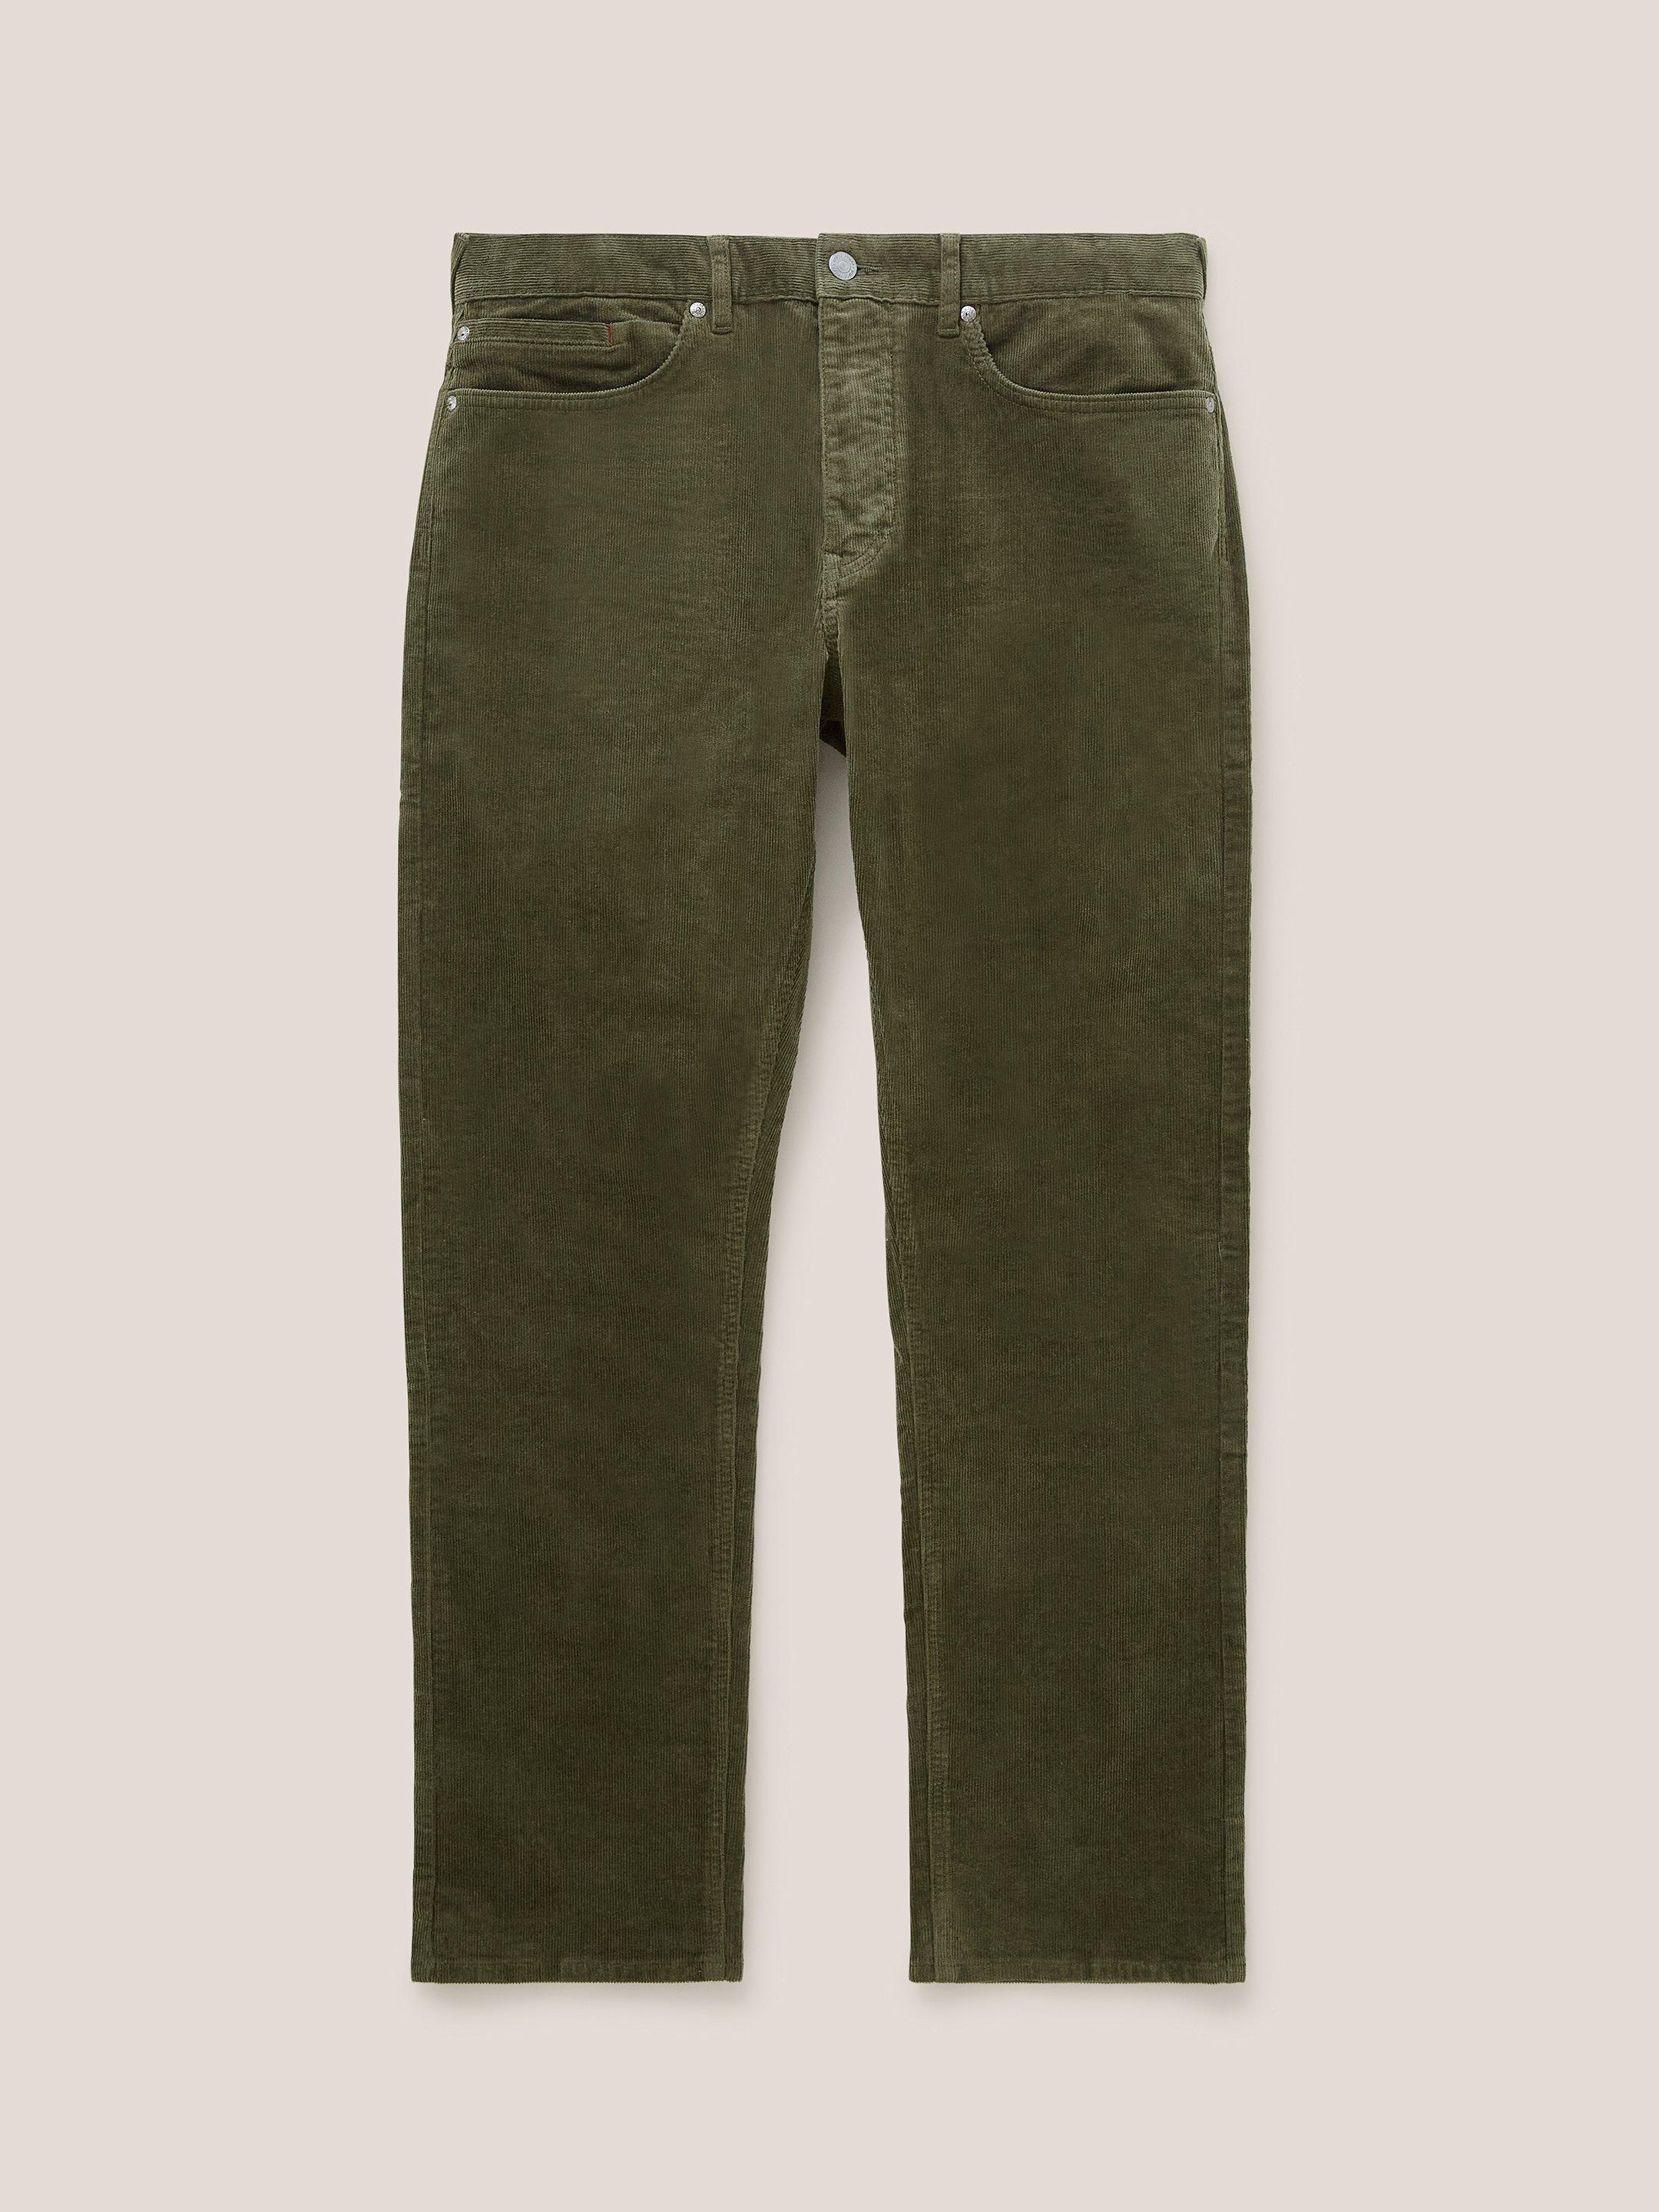 Crosby Cord Trouser in LGT GREEN - FLAT FRONT